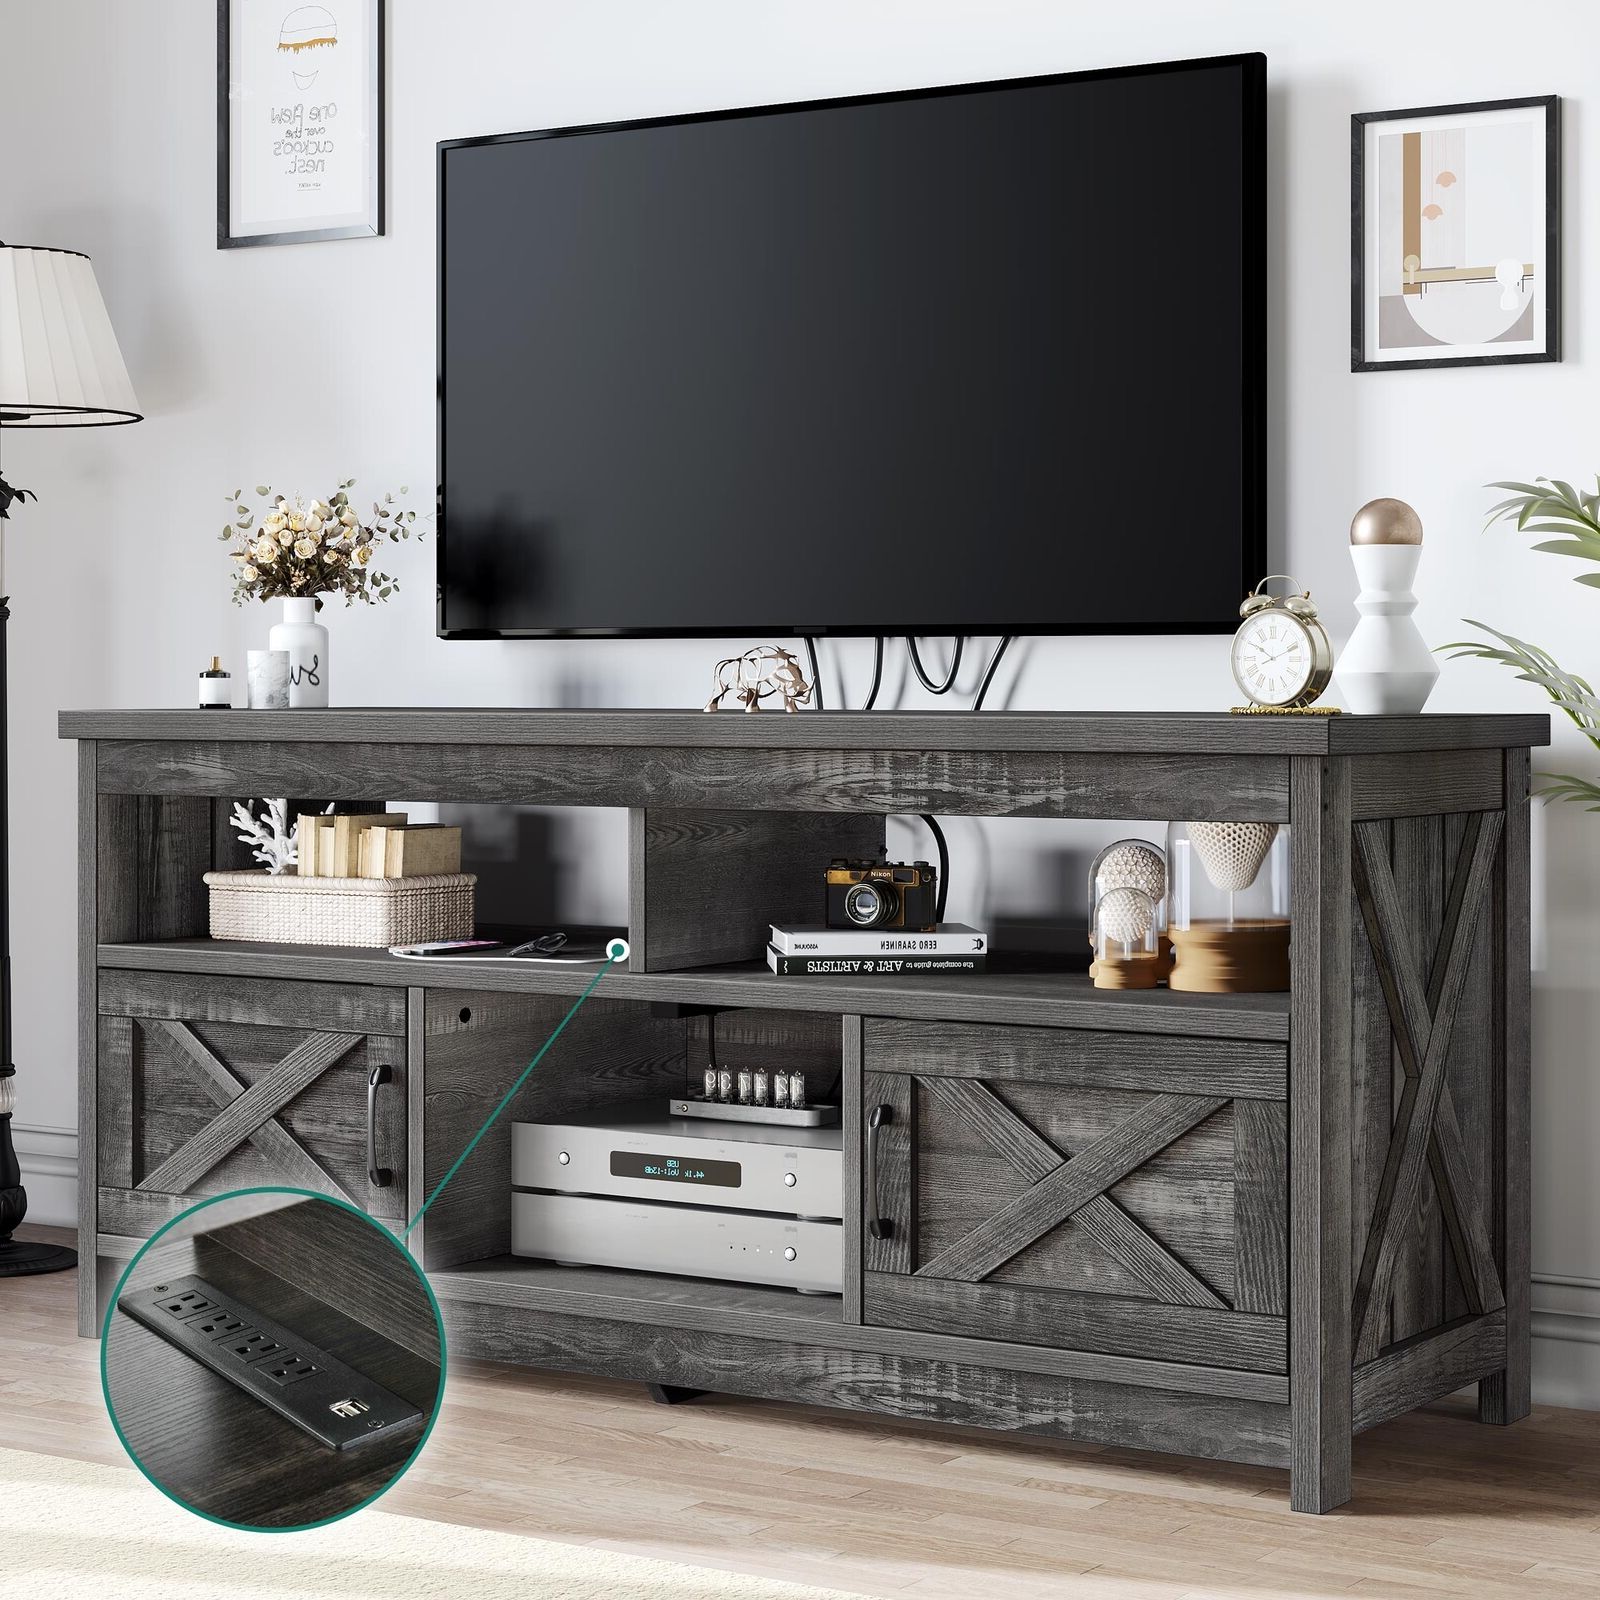 Farmhouse Tv Stand For 65 In With Power Outlet Media Console W/ Storage  Cabinet | Ebay With Regard To Farmhouse Stands With Shelves (View 8 of 20)